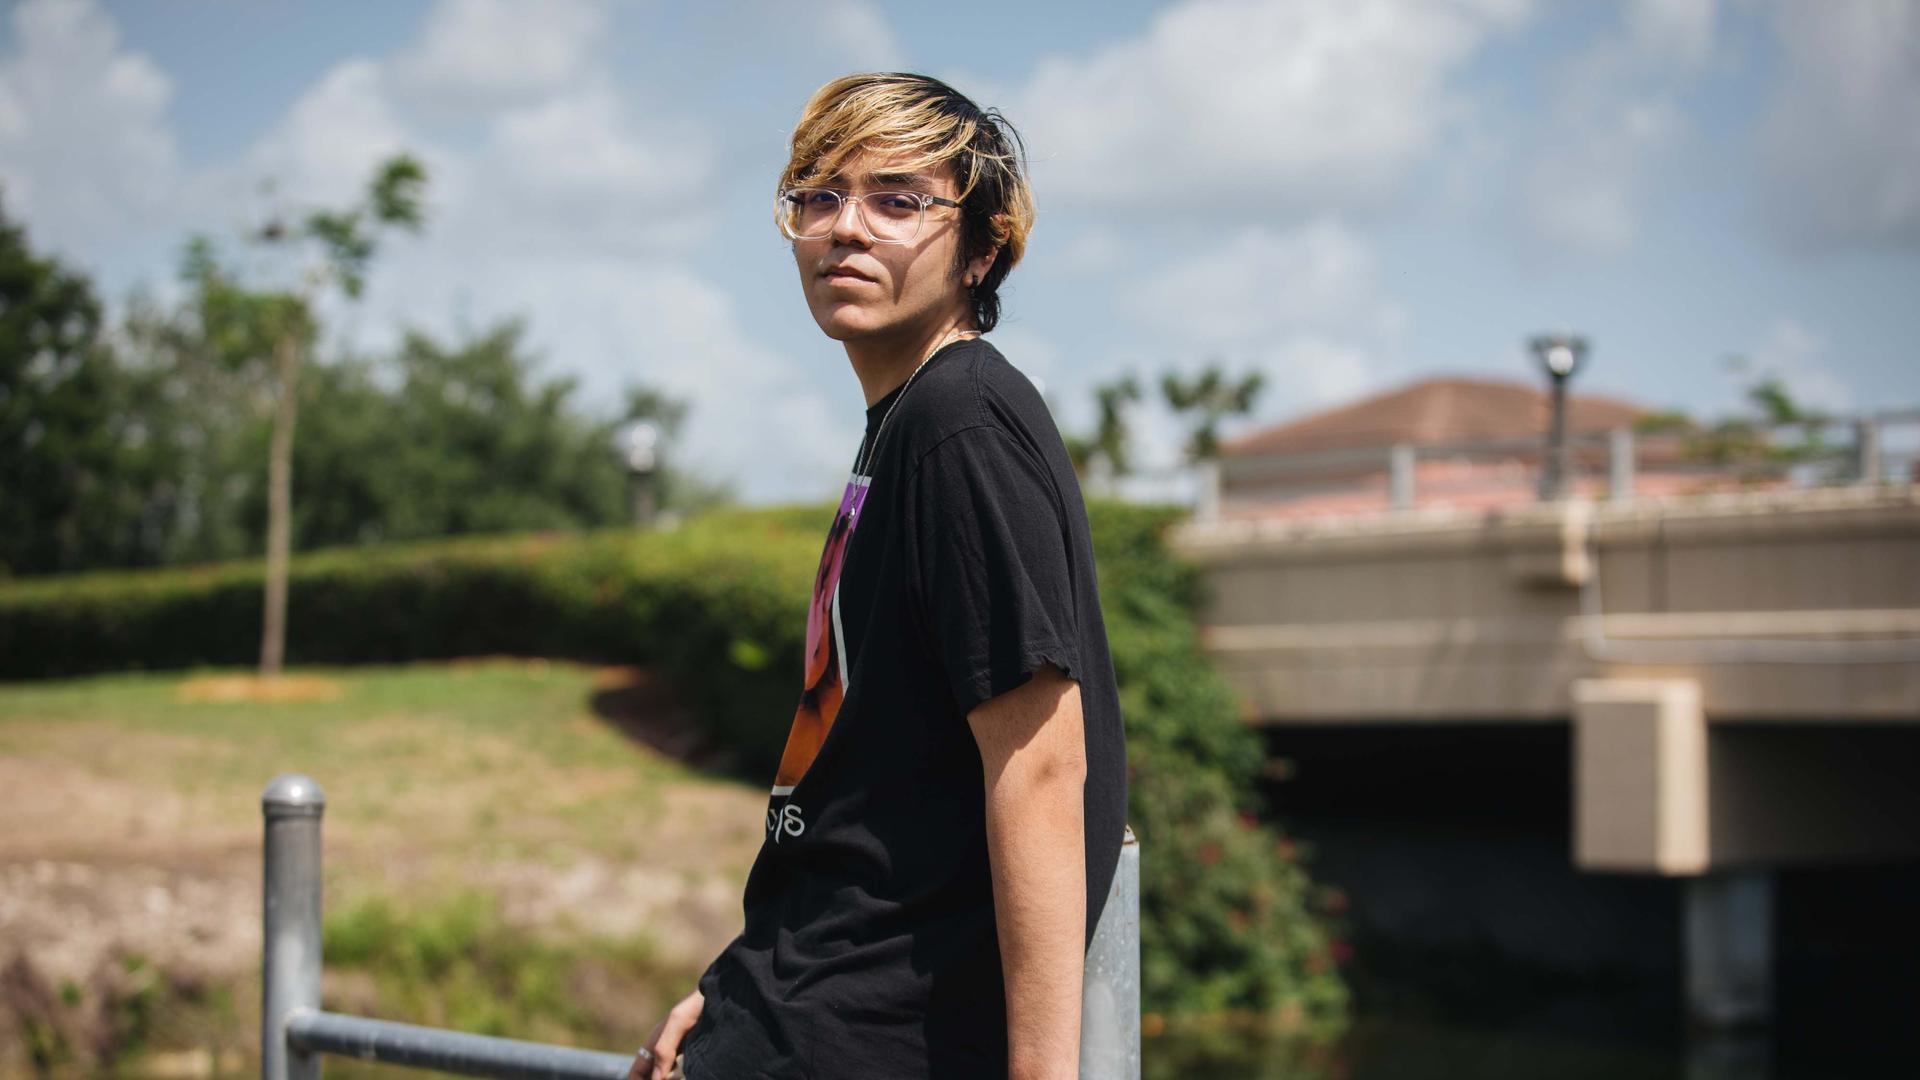 Jacob Cuenca, 18, a registered Republican, poses outside his home in Homestead, Florida, on May 21, 2020. 